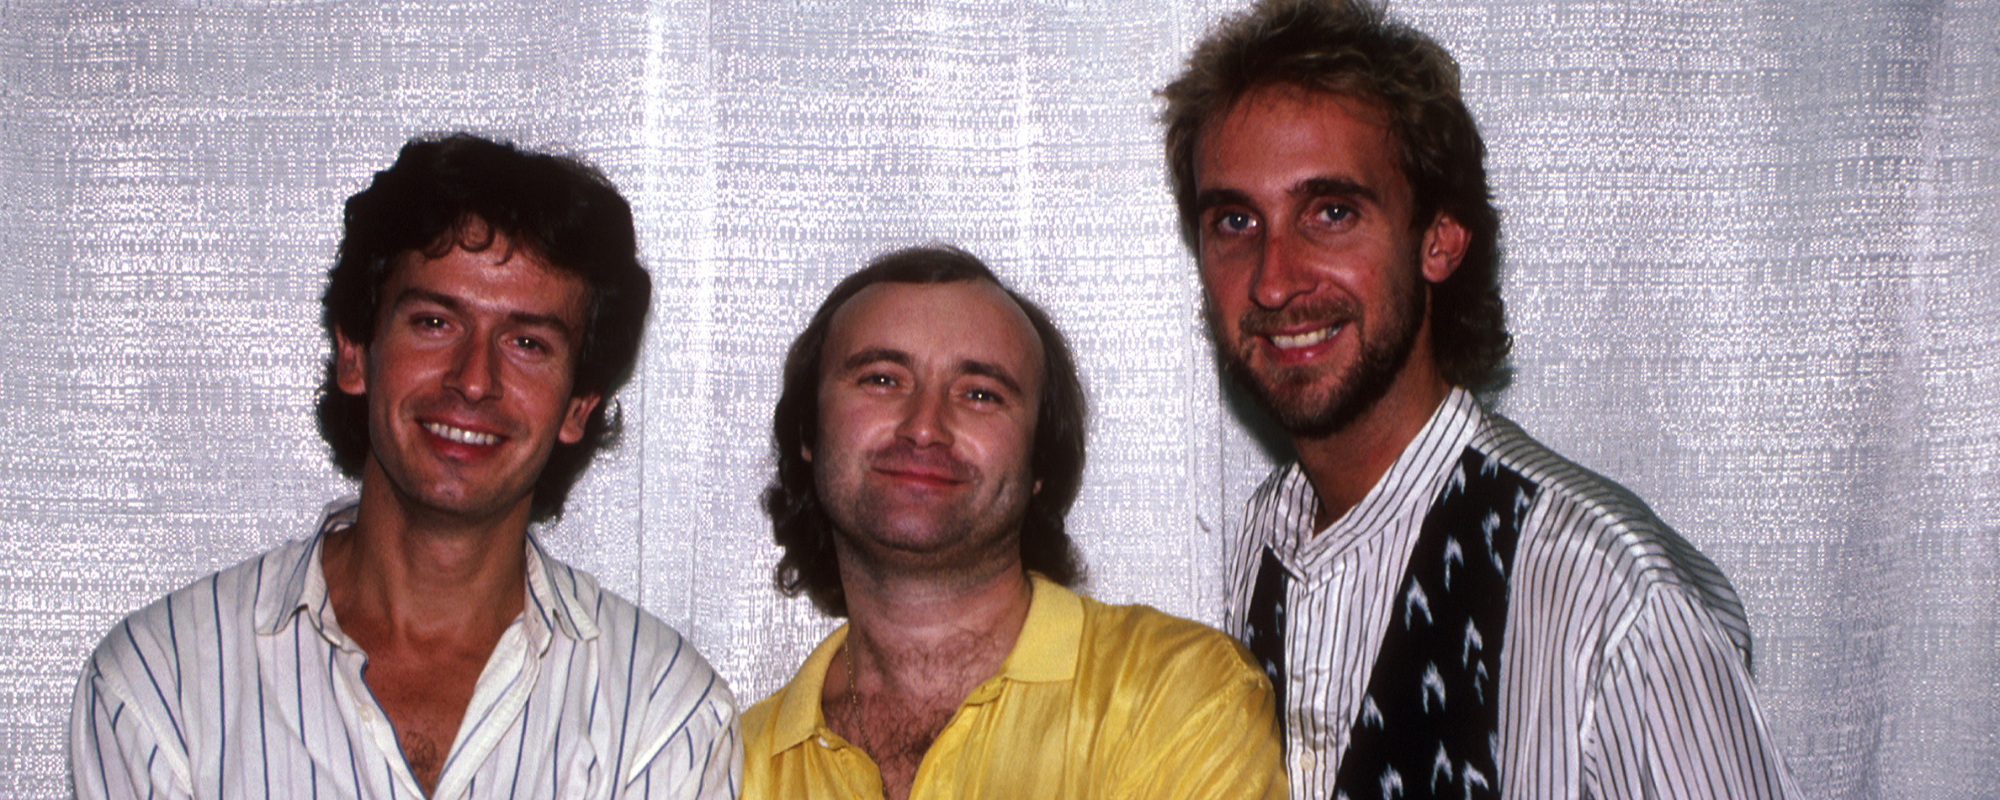 2 ’80s Prog Suites from Genesis You Probably Didn’t Know About